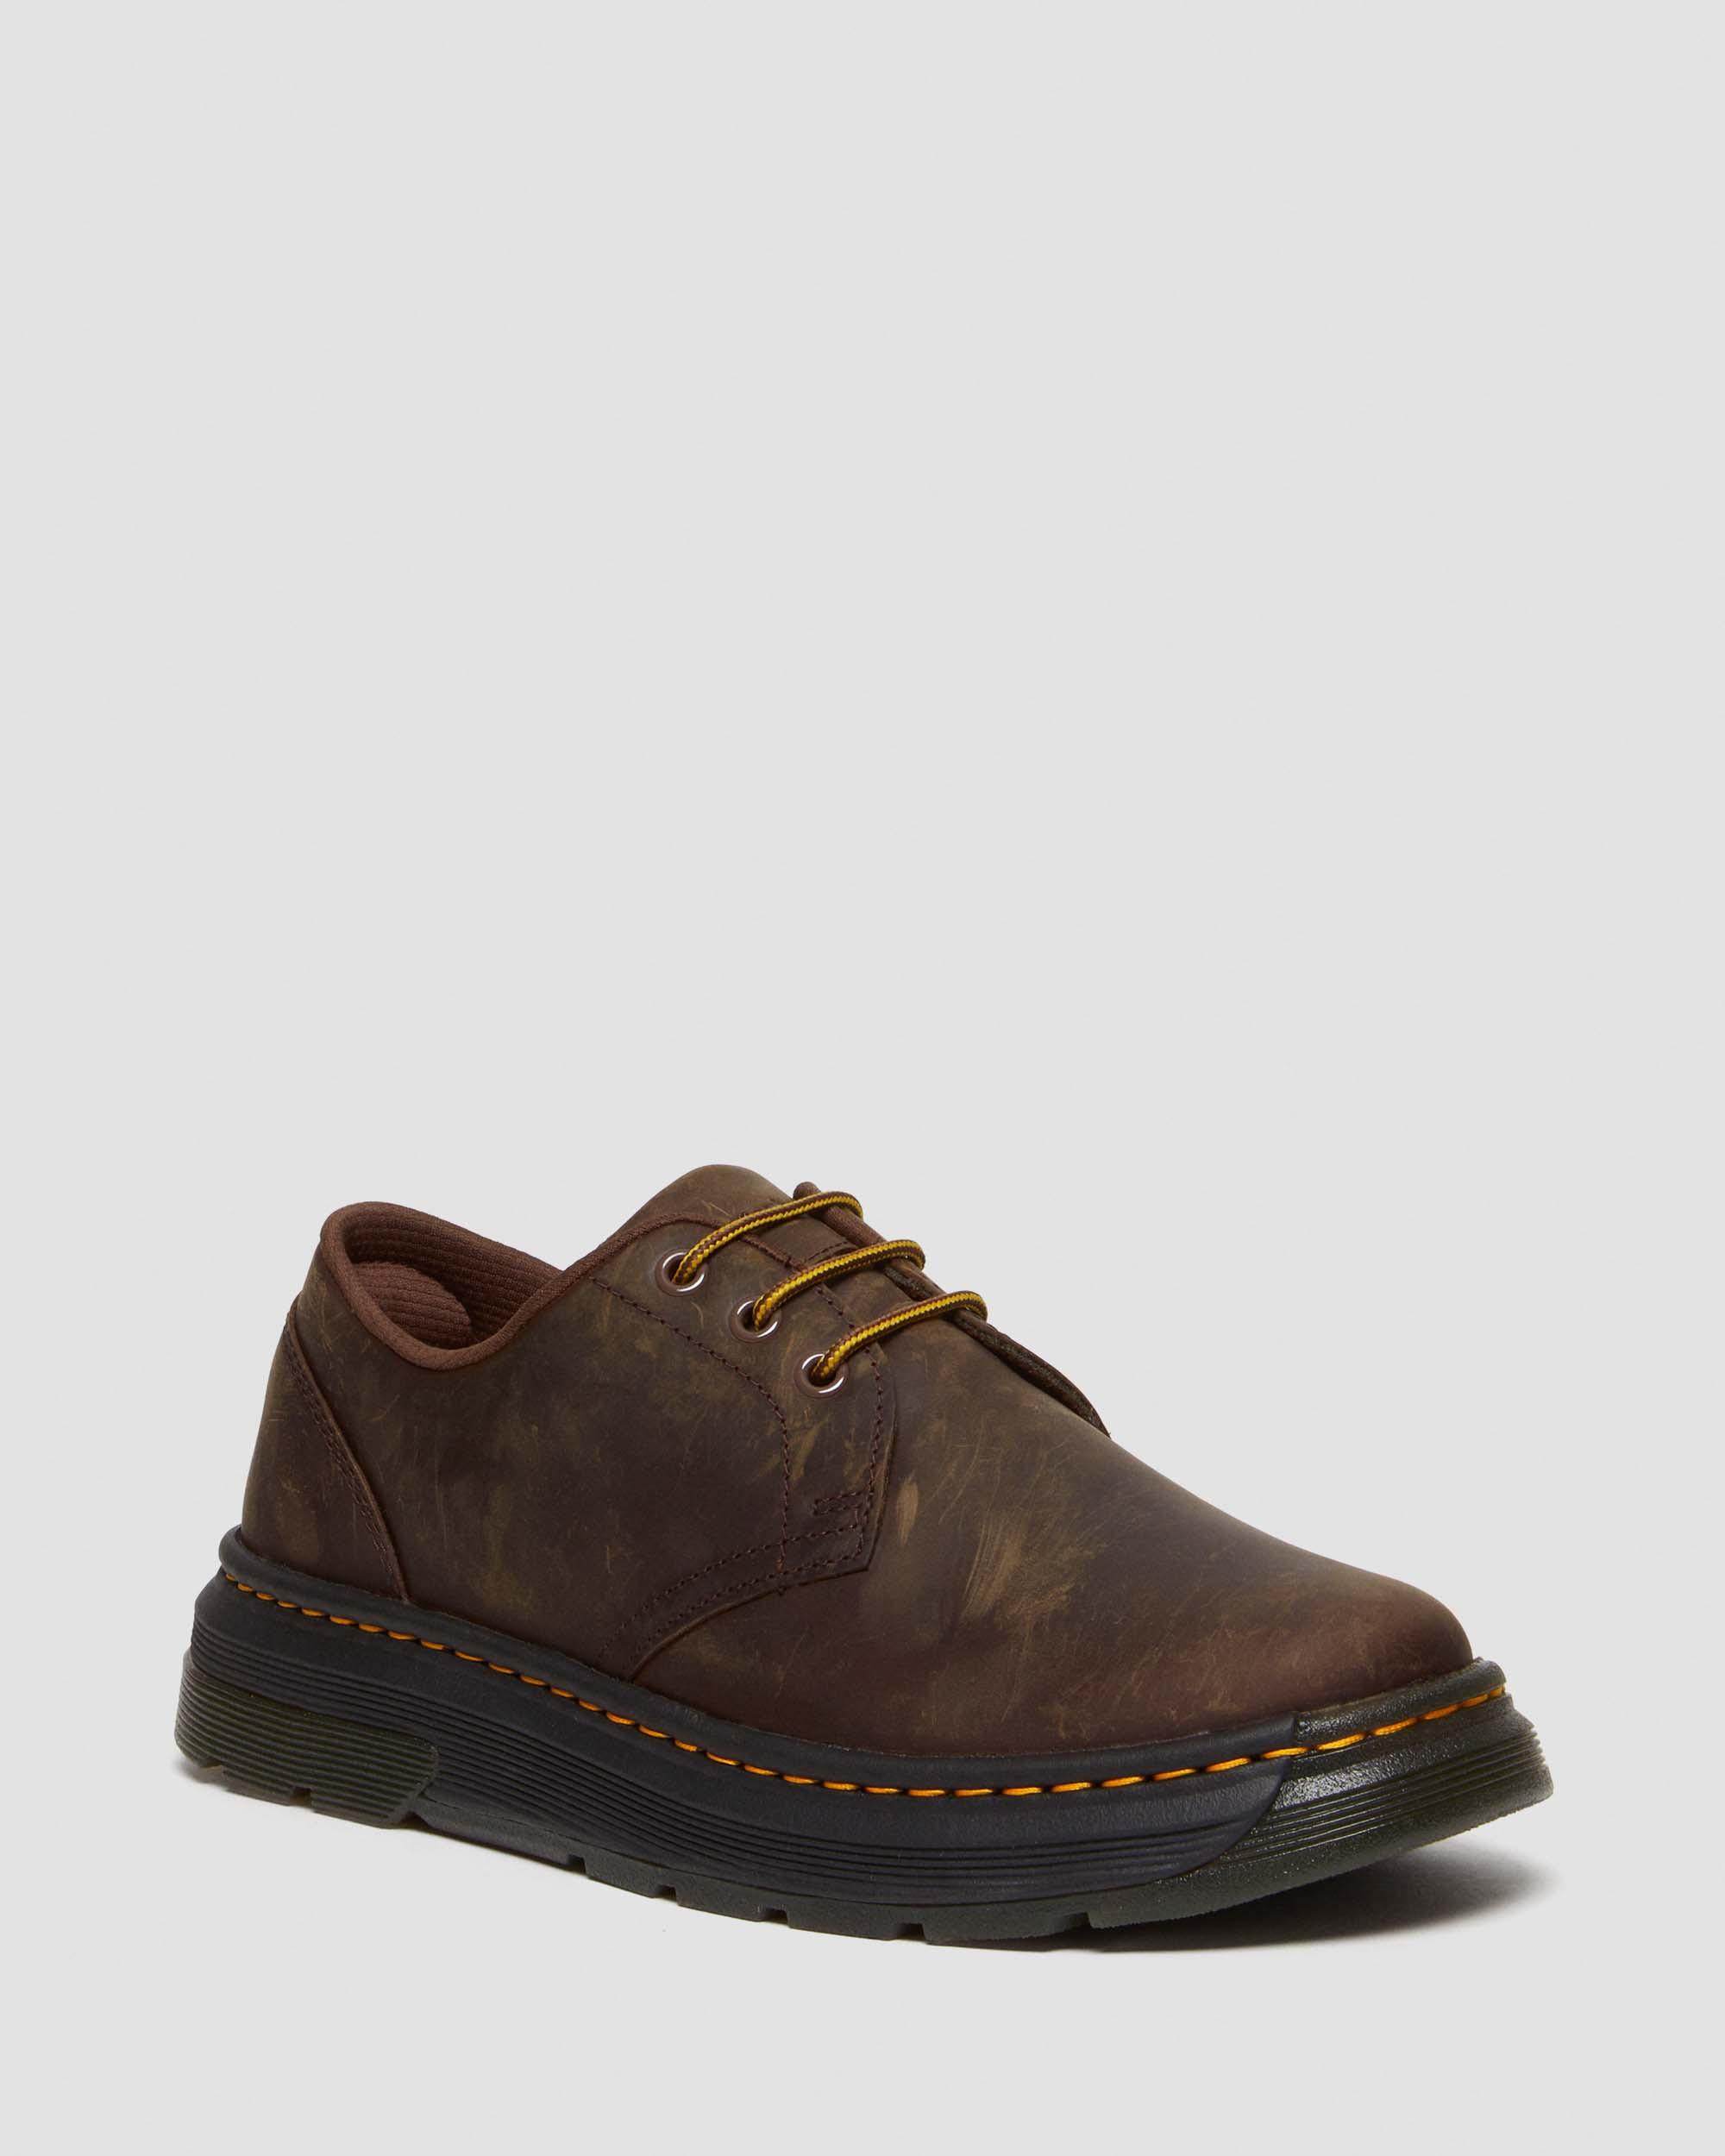 Crewson Lo Crazy Horse Leather Shoes in Dark Brown